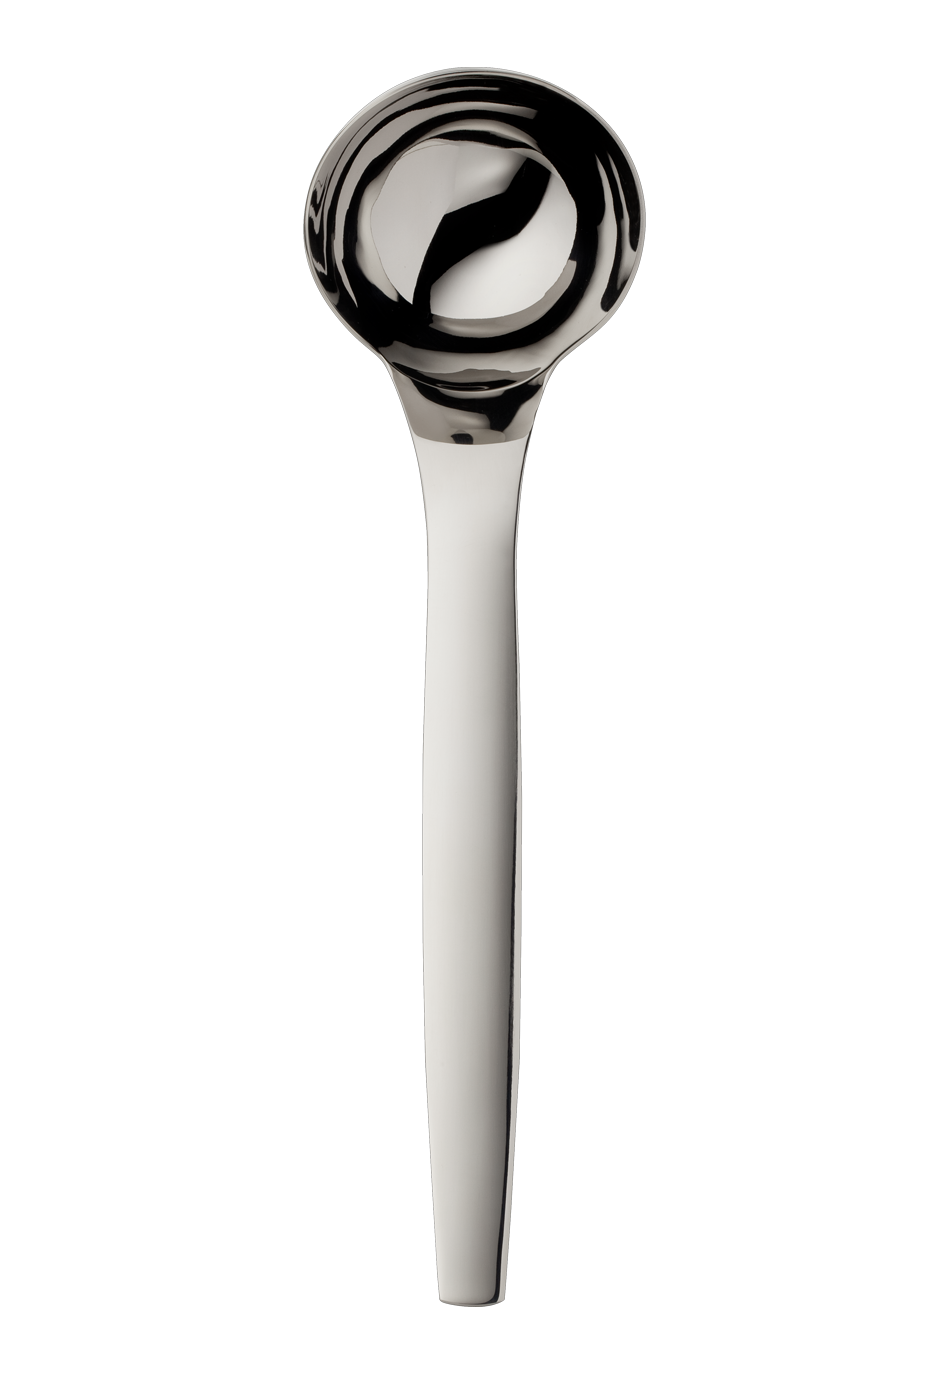 Pax Soup Ladle (18/8 stainless steel)